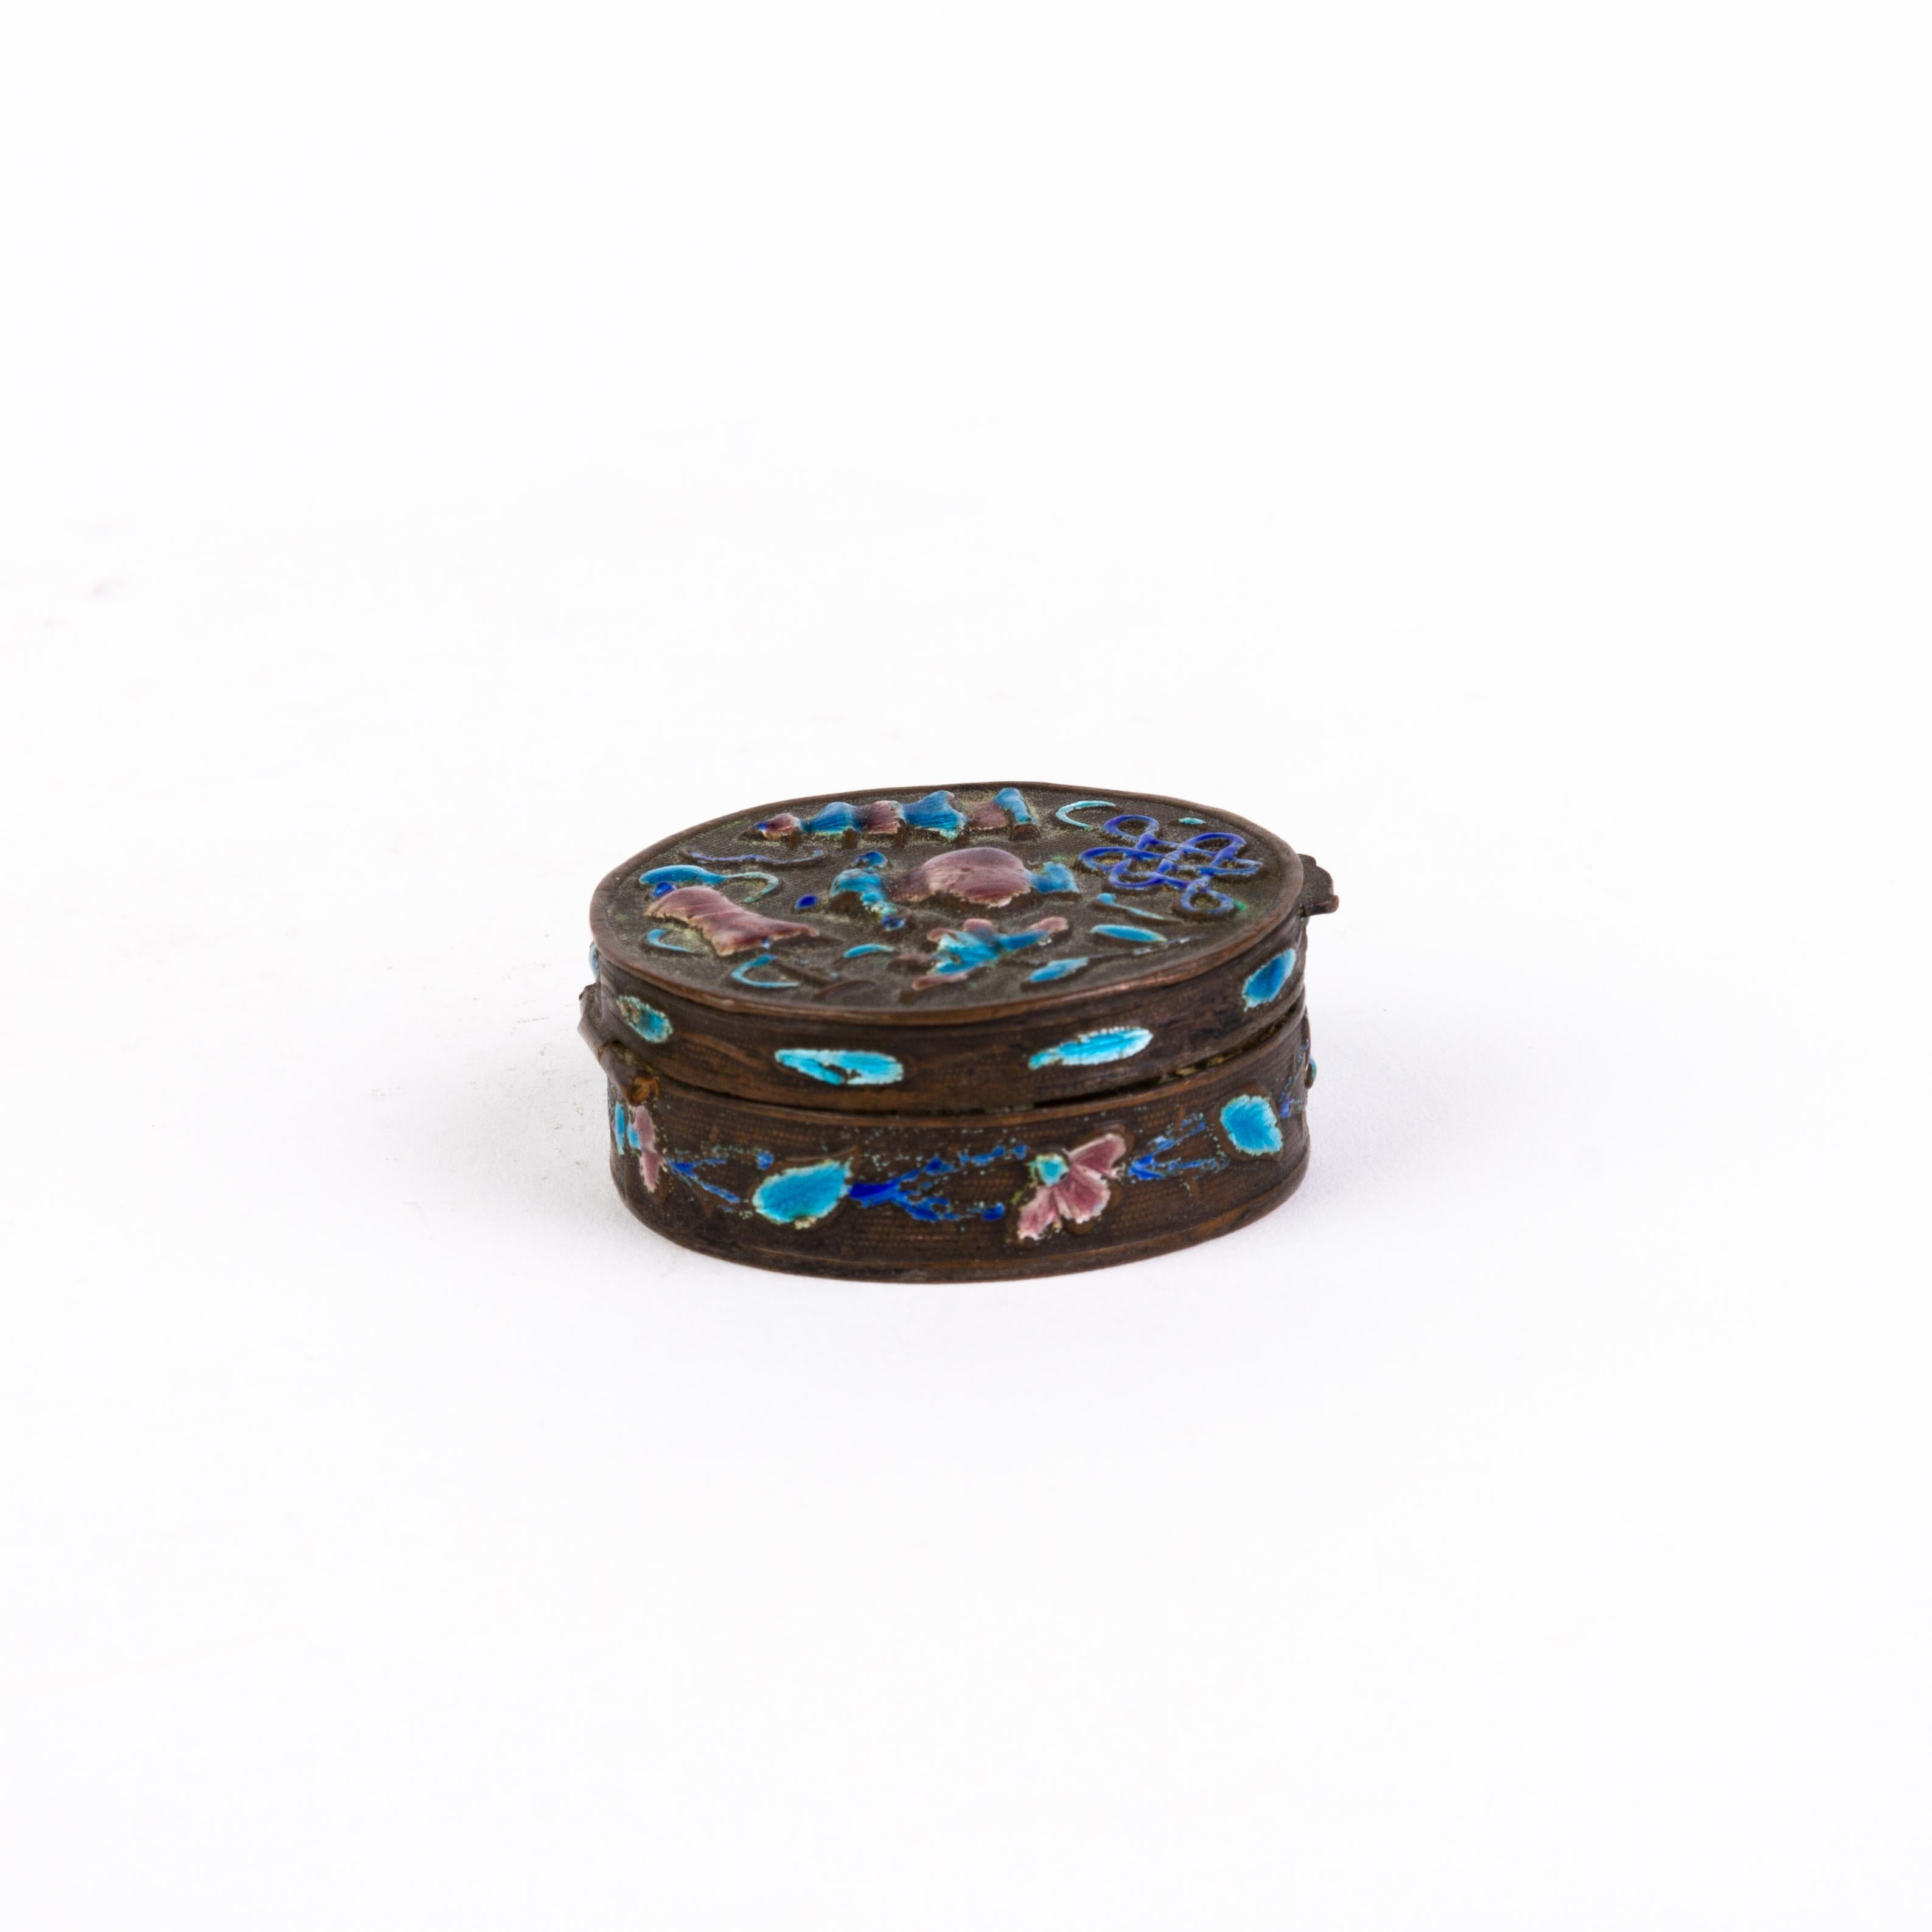 Chinese Enamel Cloisonne Snuff Box
Good condition.
From a private collection.
Free international shipping.